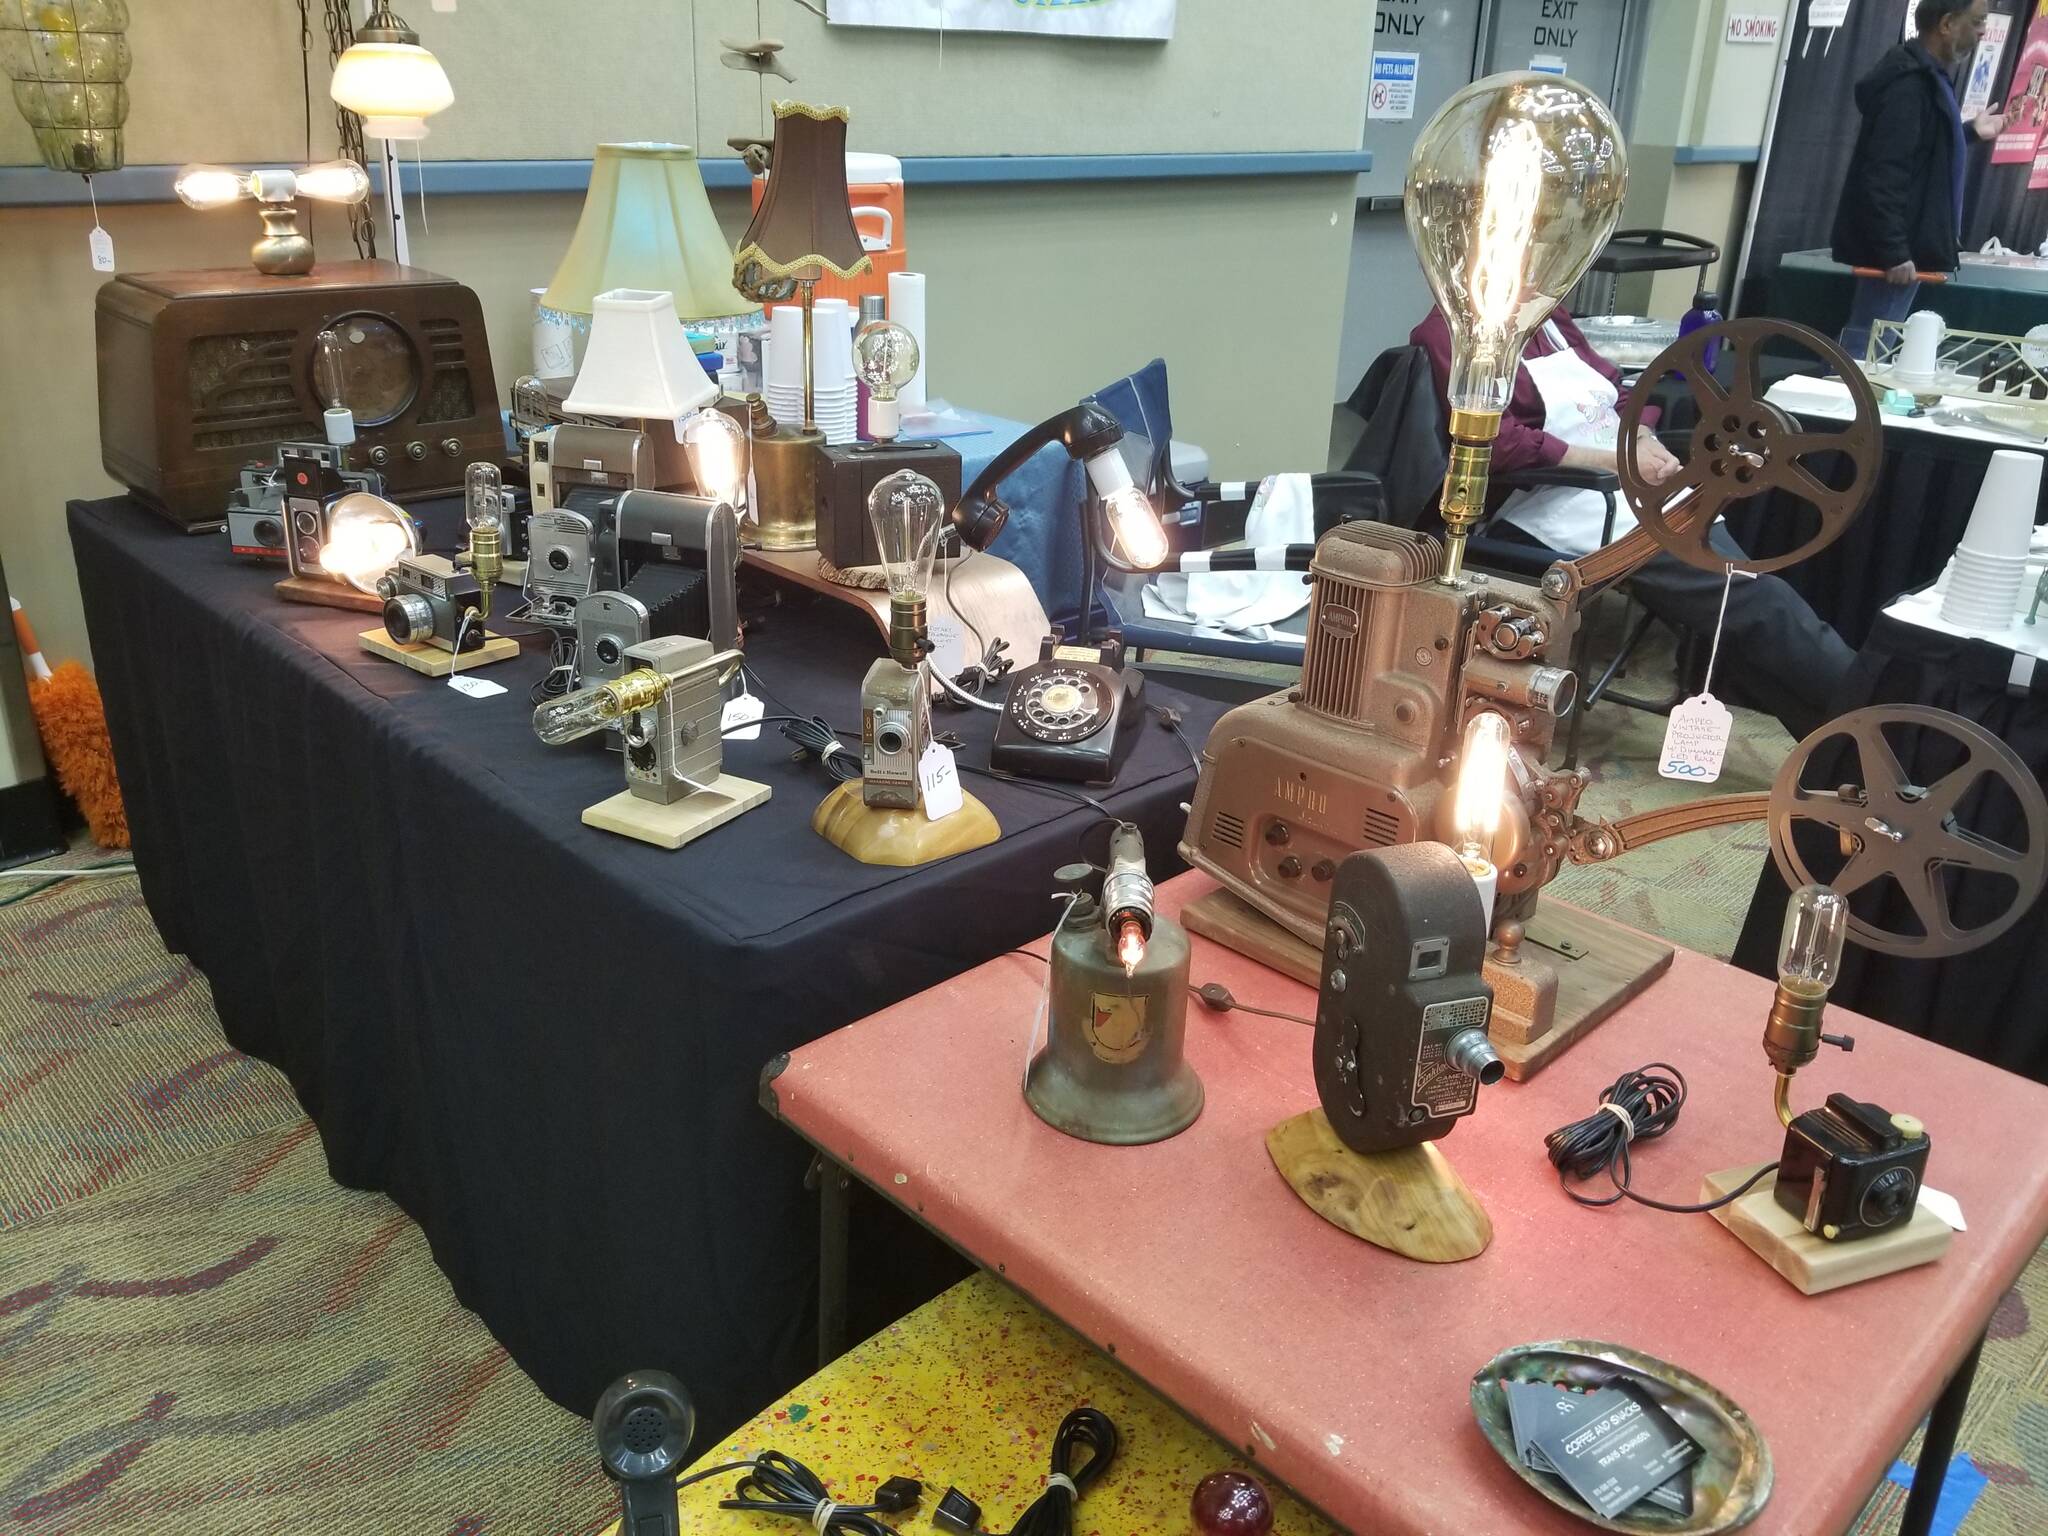 From modern-day blenders to World War II era phones, Travis Johansen’s booth of unique and creative lamps saw constant attention from guests looking to either buy one of his specialty lamps or listen to the backstory of how he came across some of his older material.